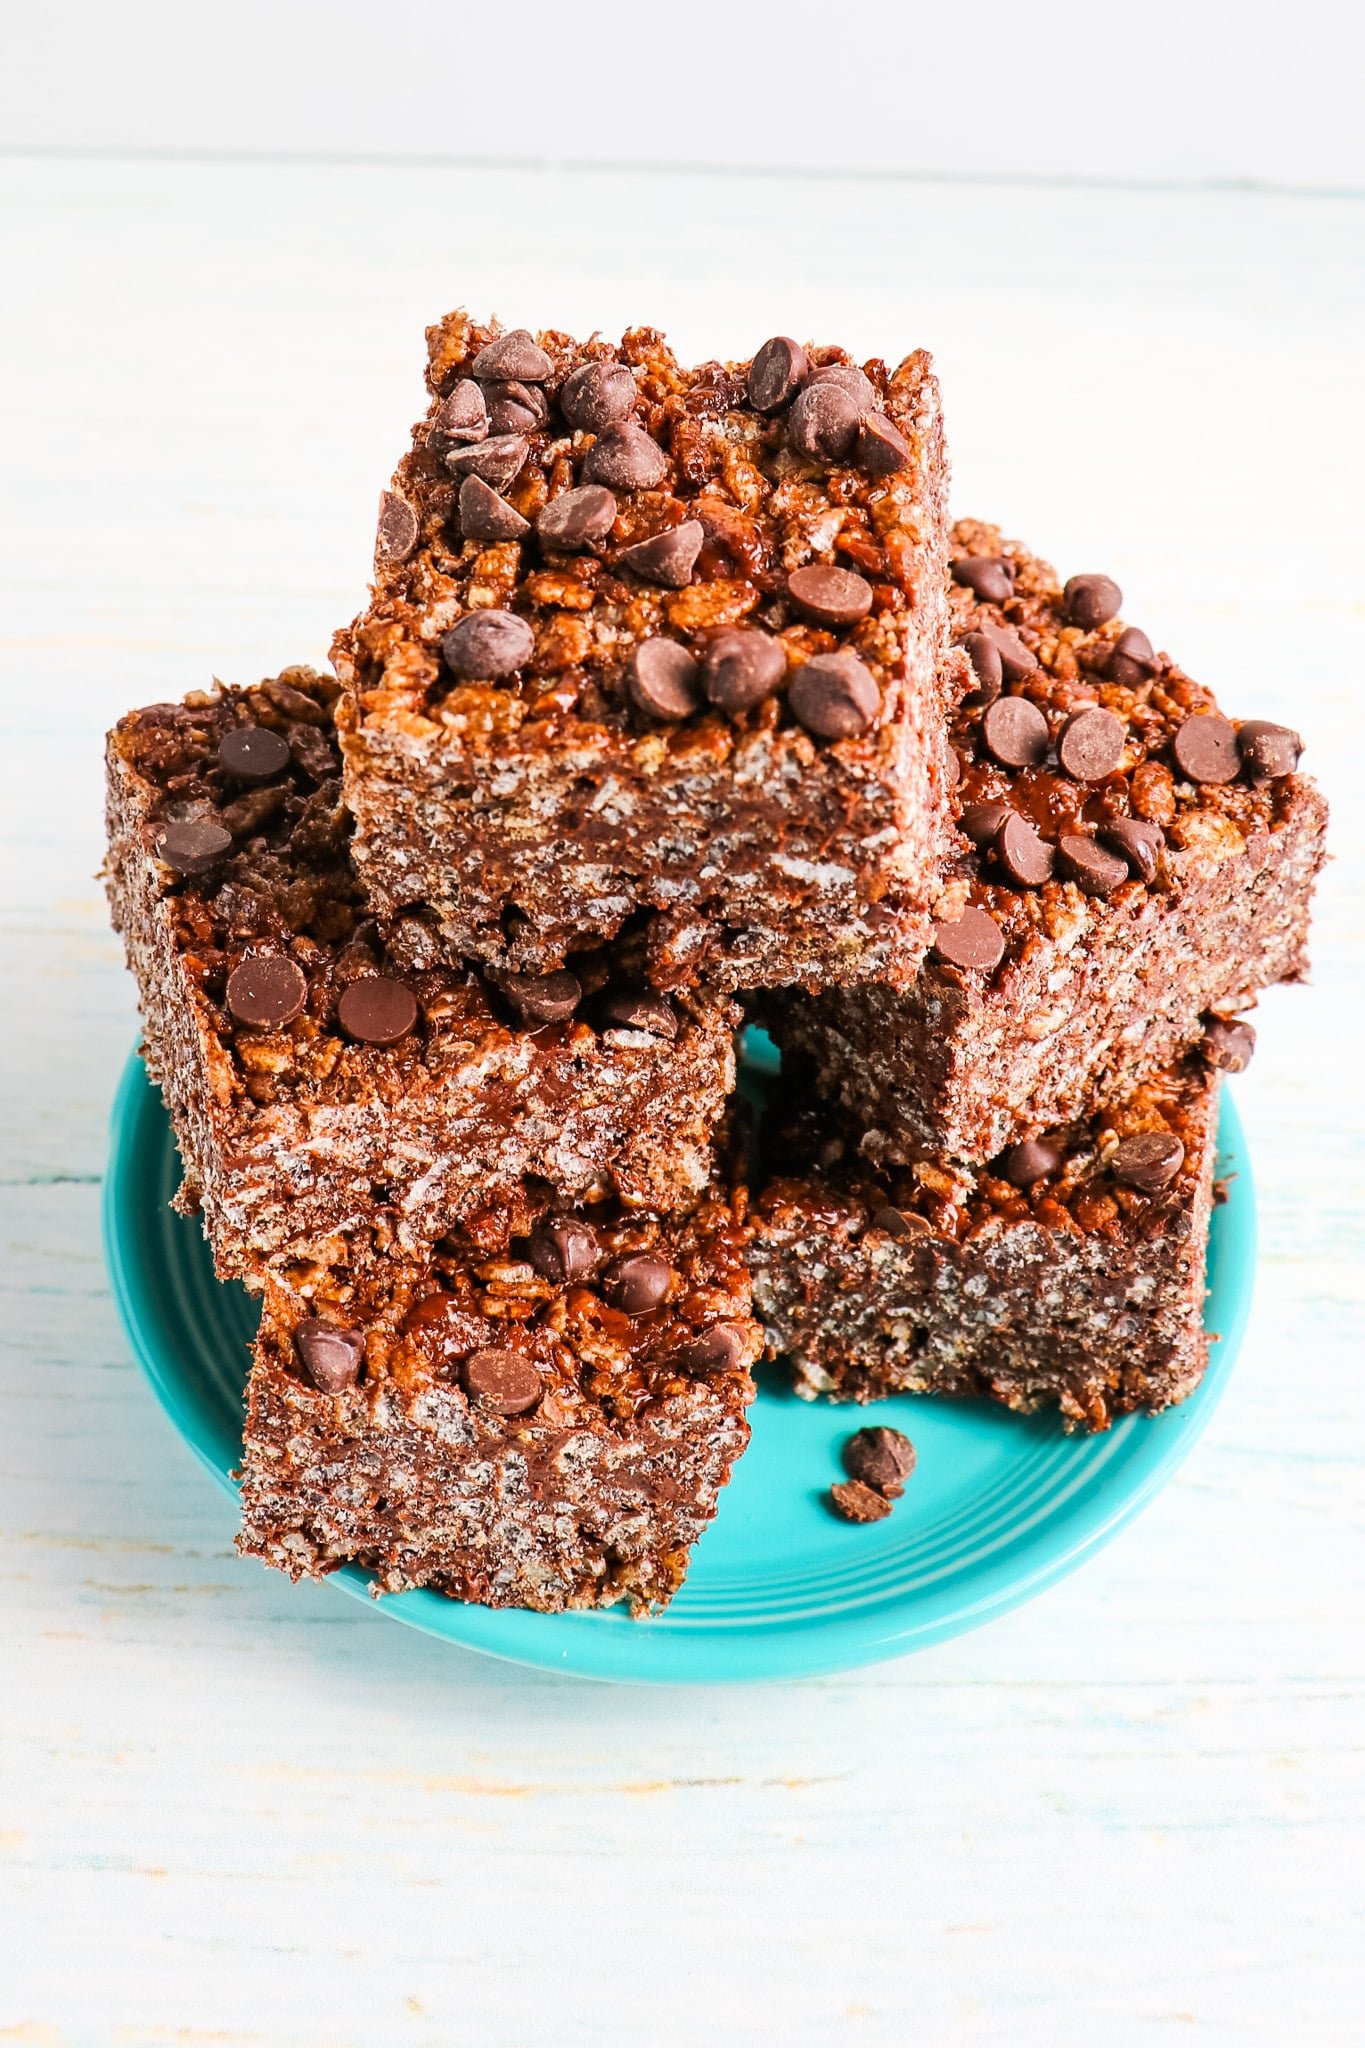 Chocolate rice krispie treats cut into squares on a plate.